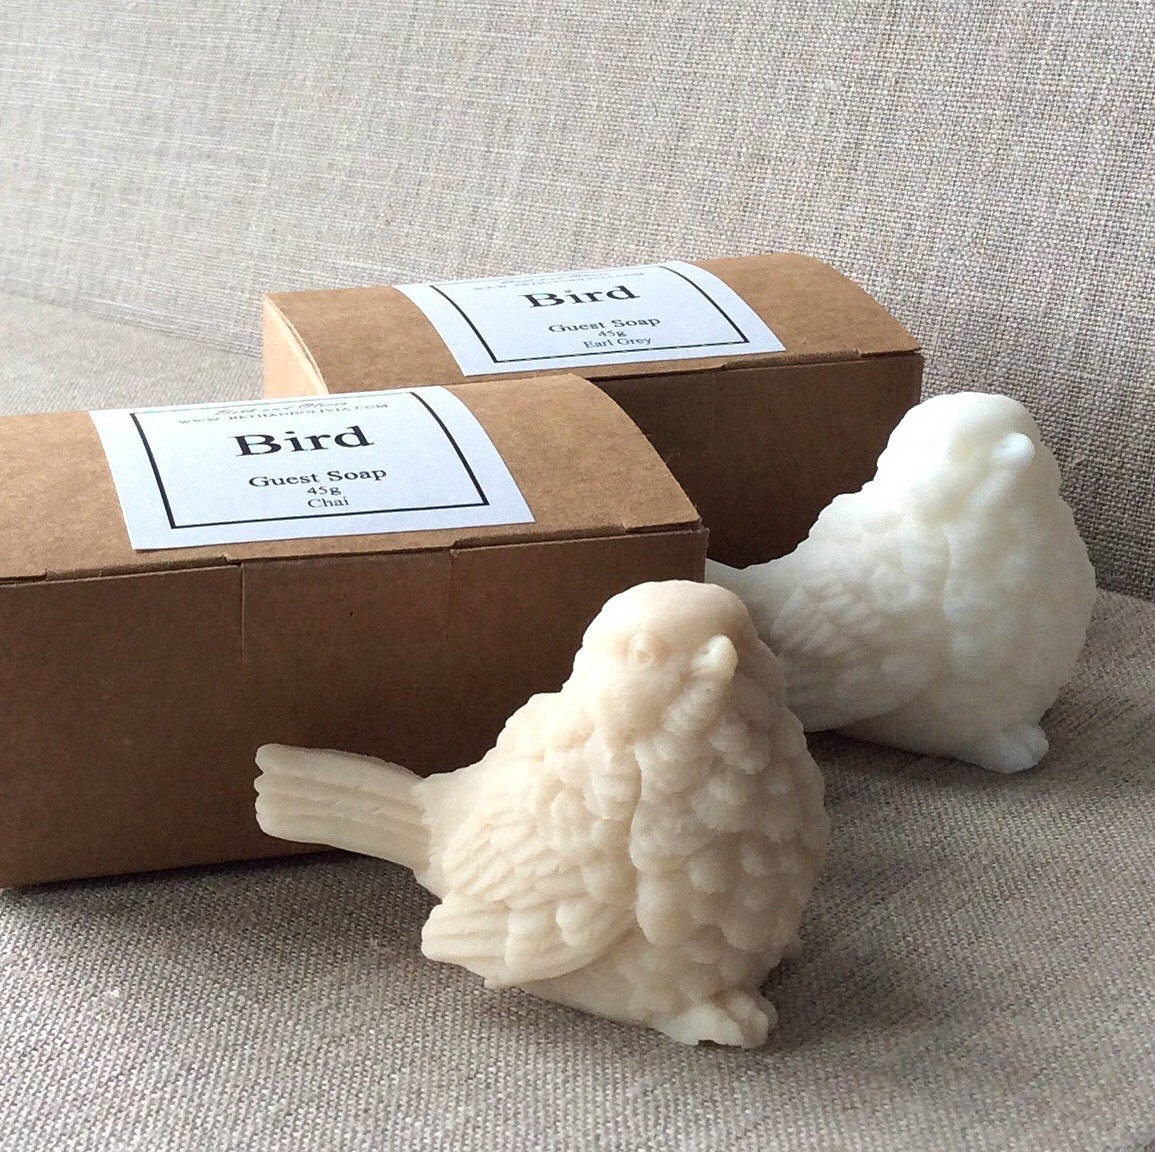 Bird Soap, Earl grey soap, Chai soap, guest soap, rustic soap, Rustic wedding, gifts under 10, bridal shower favors, gifts for her